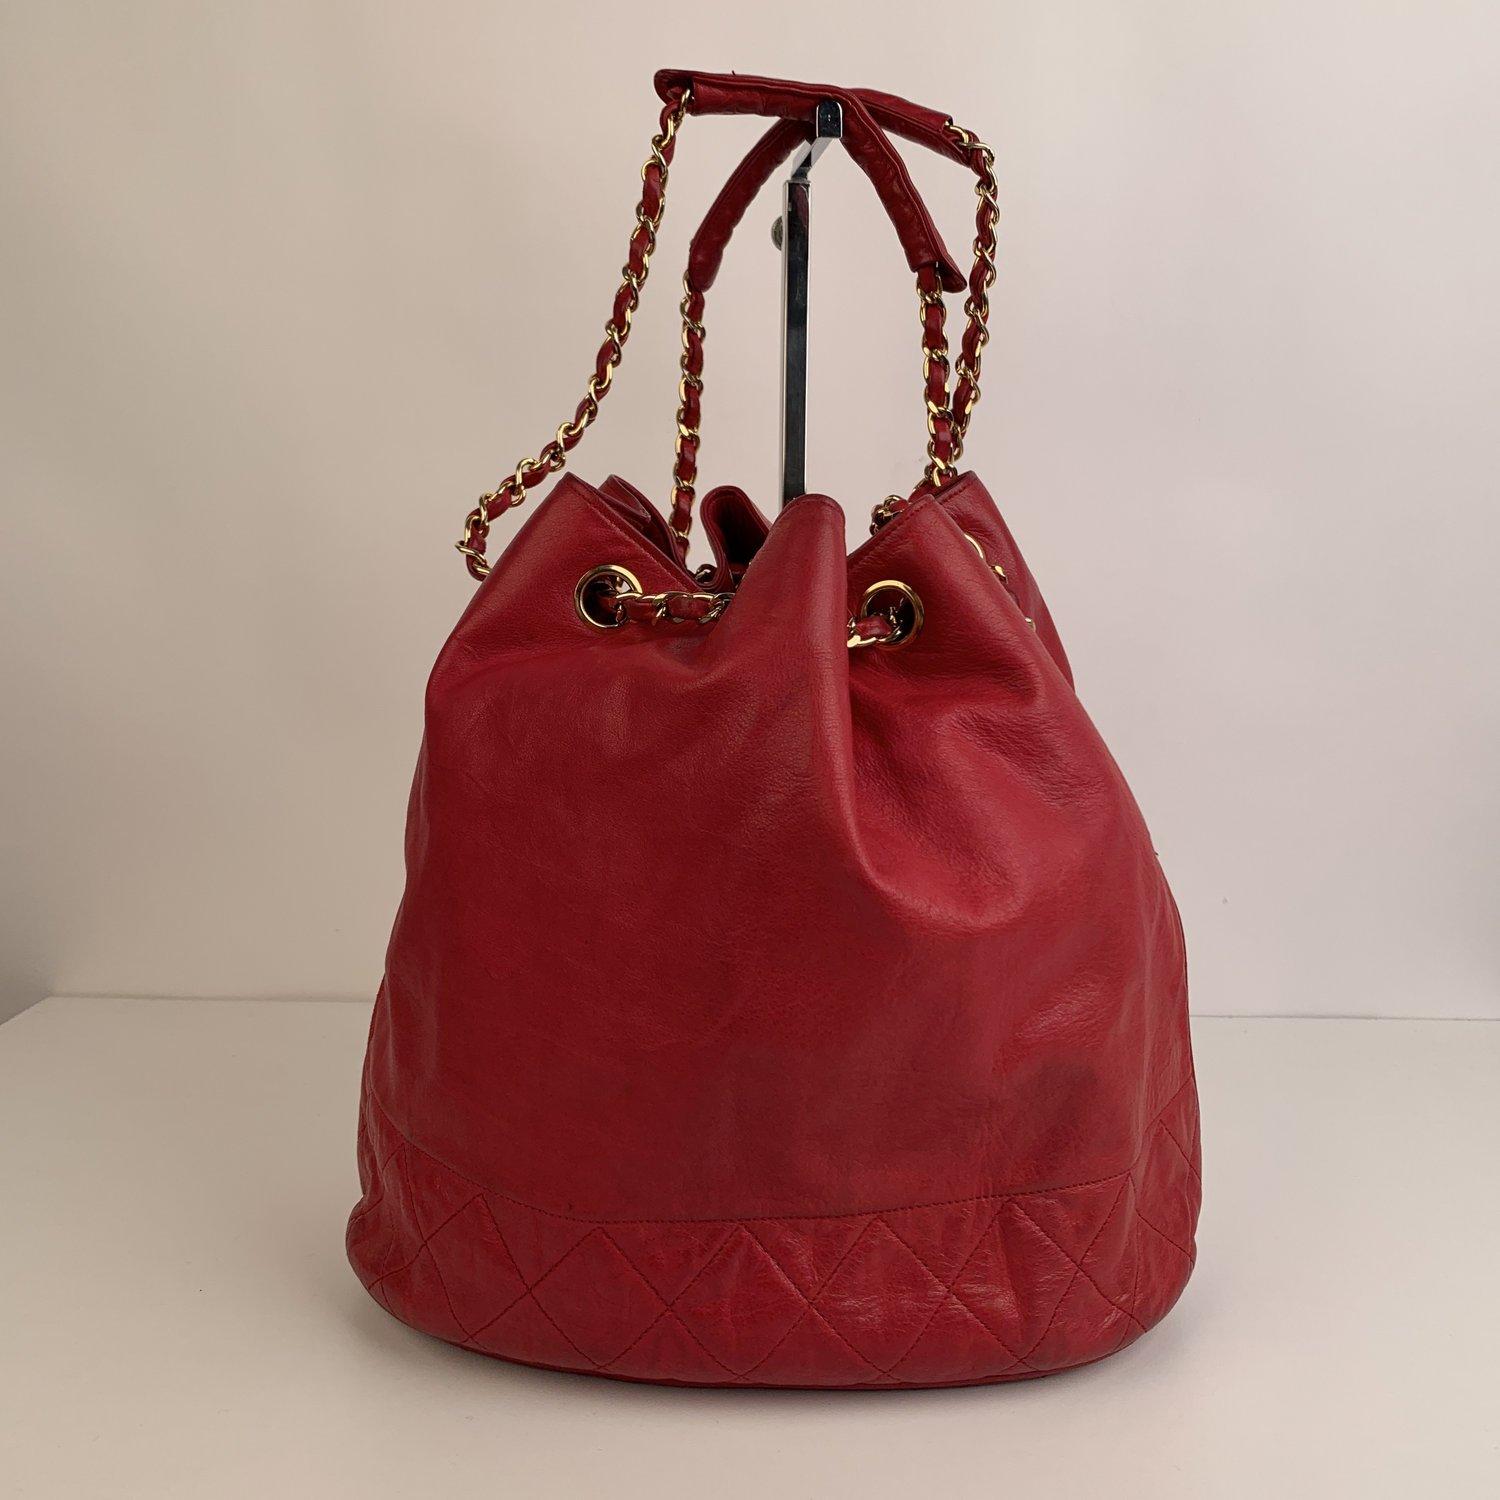 Chanel Vintage Red Leather Bucket Shoulder Bag with Bottom Quilting 8